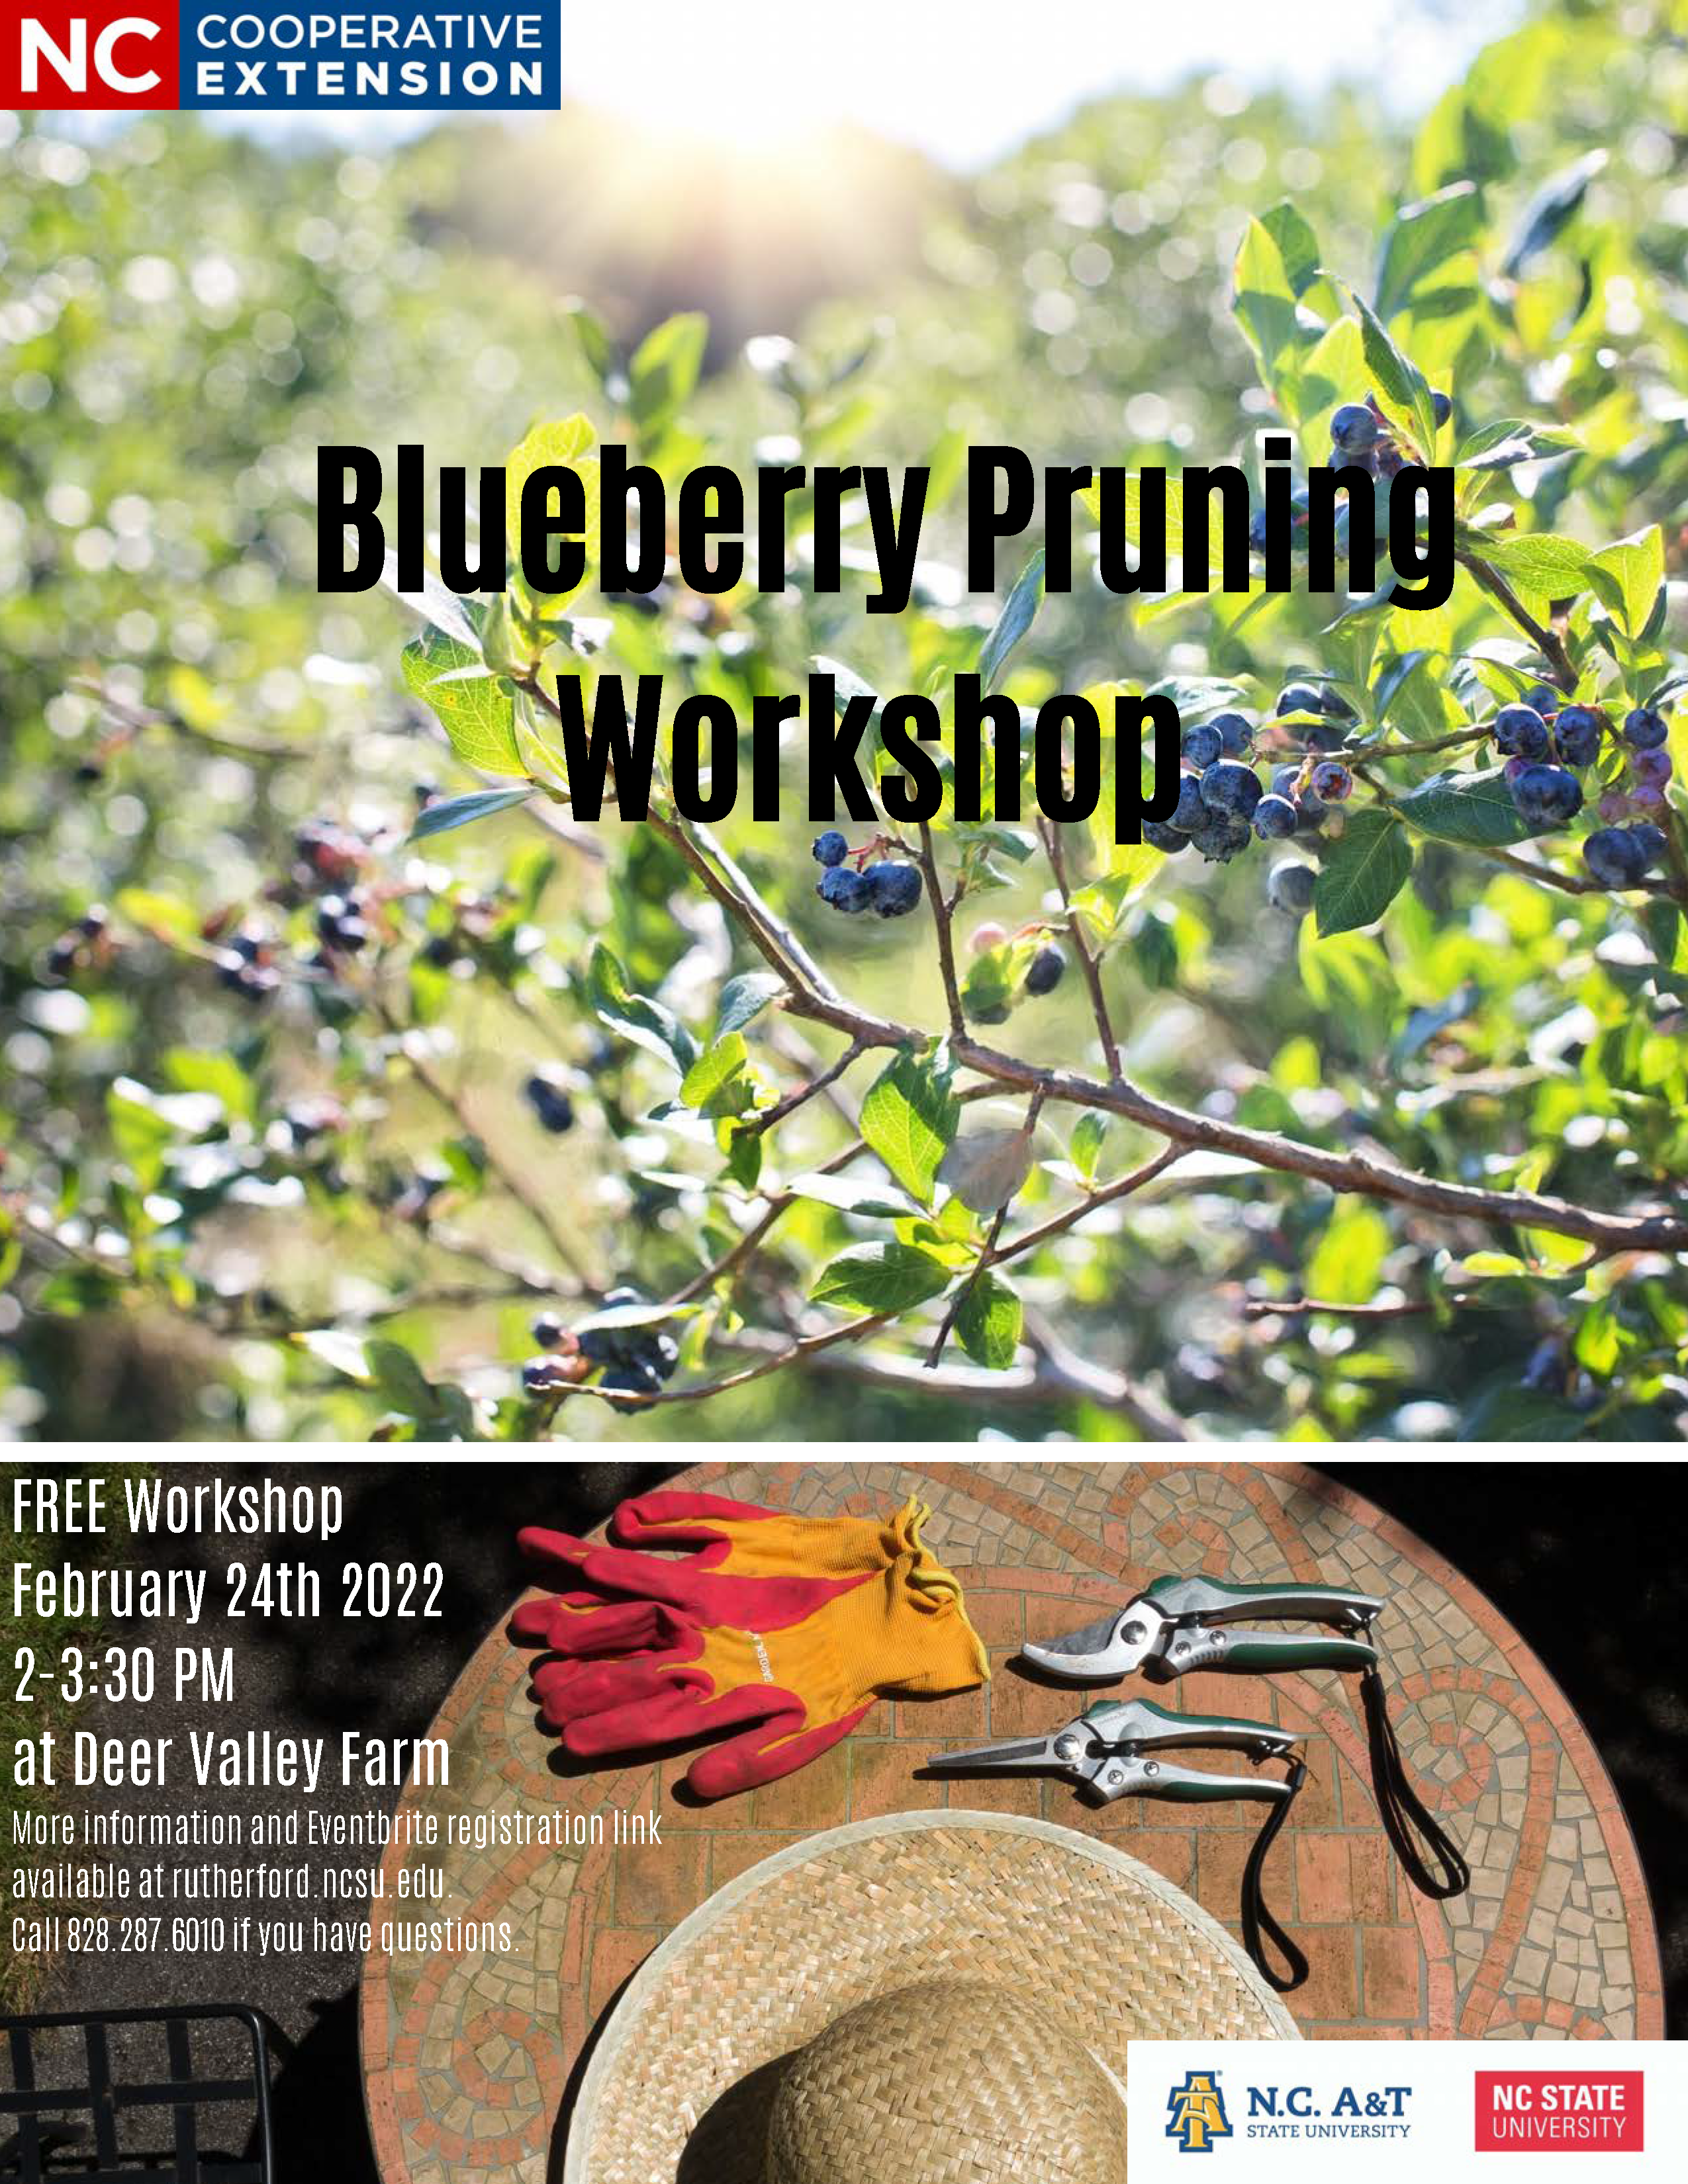 Image with blueberry bushes, a hat, gloves, and pruning shears.